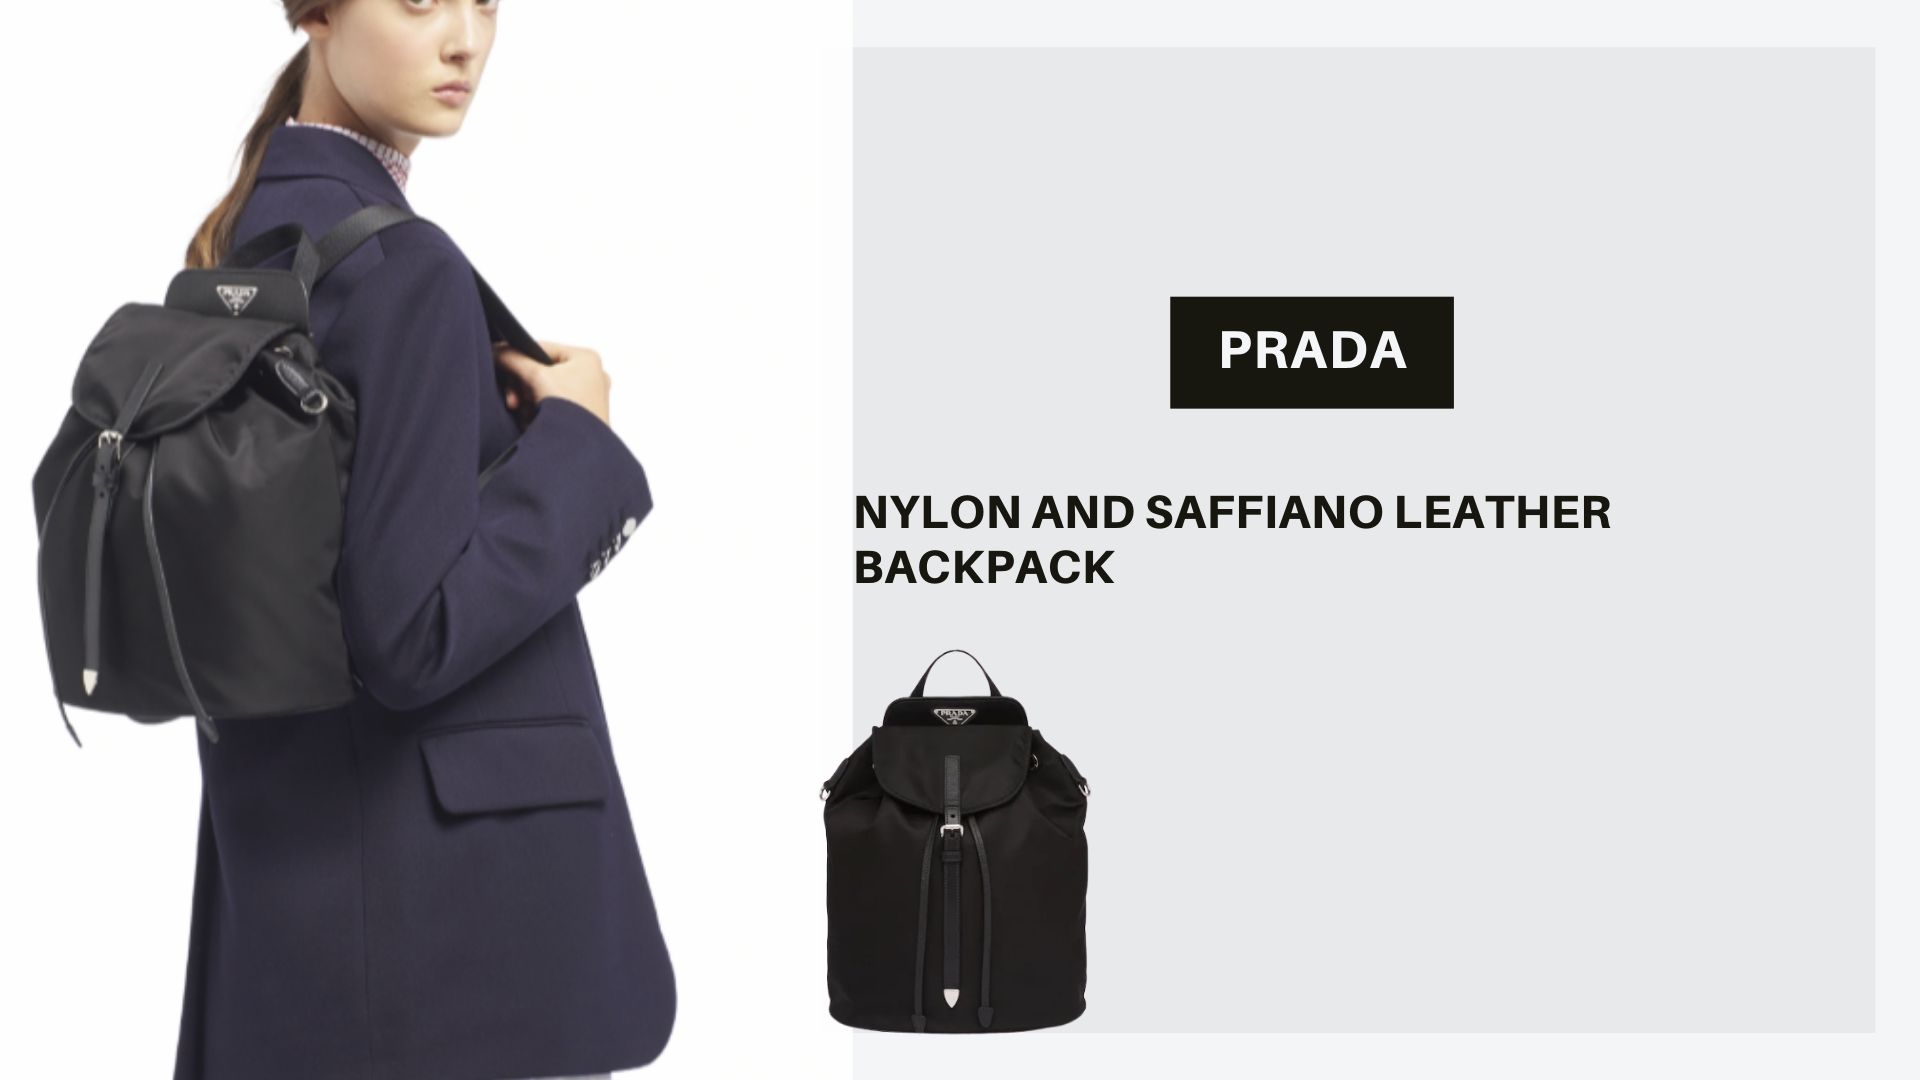 Nylon and Saffiano leather backpack